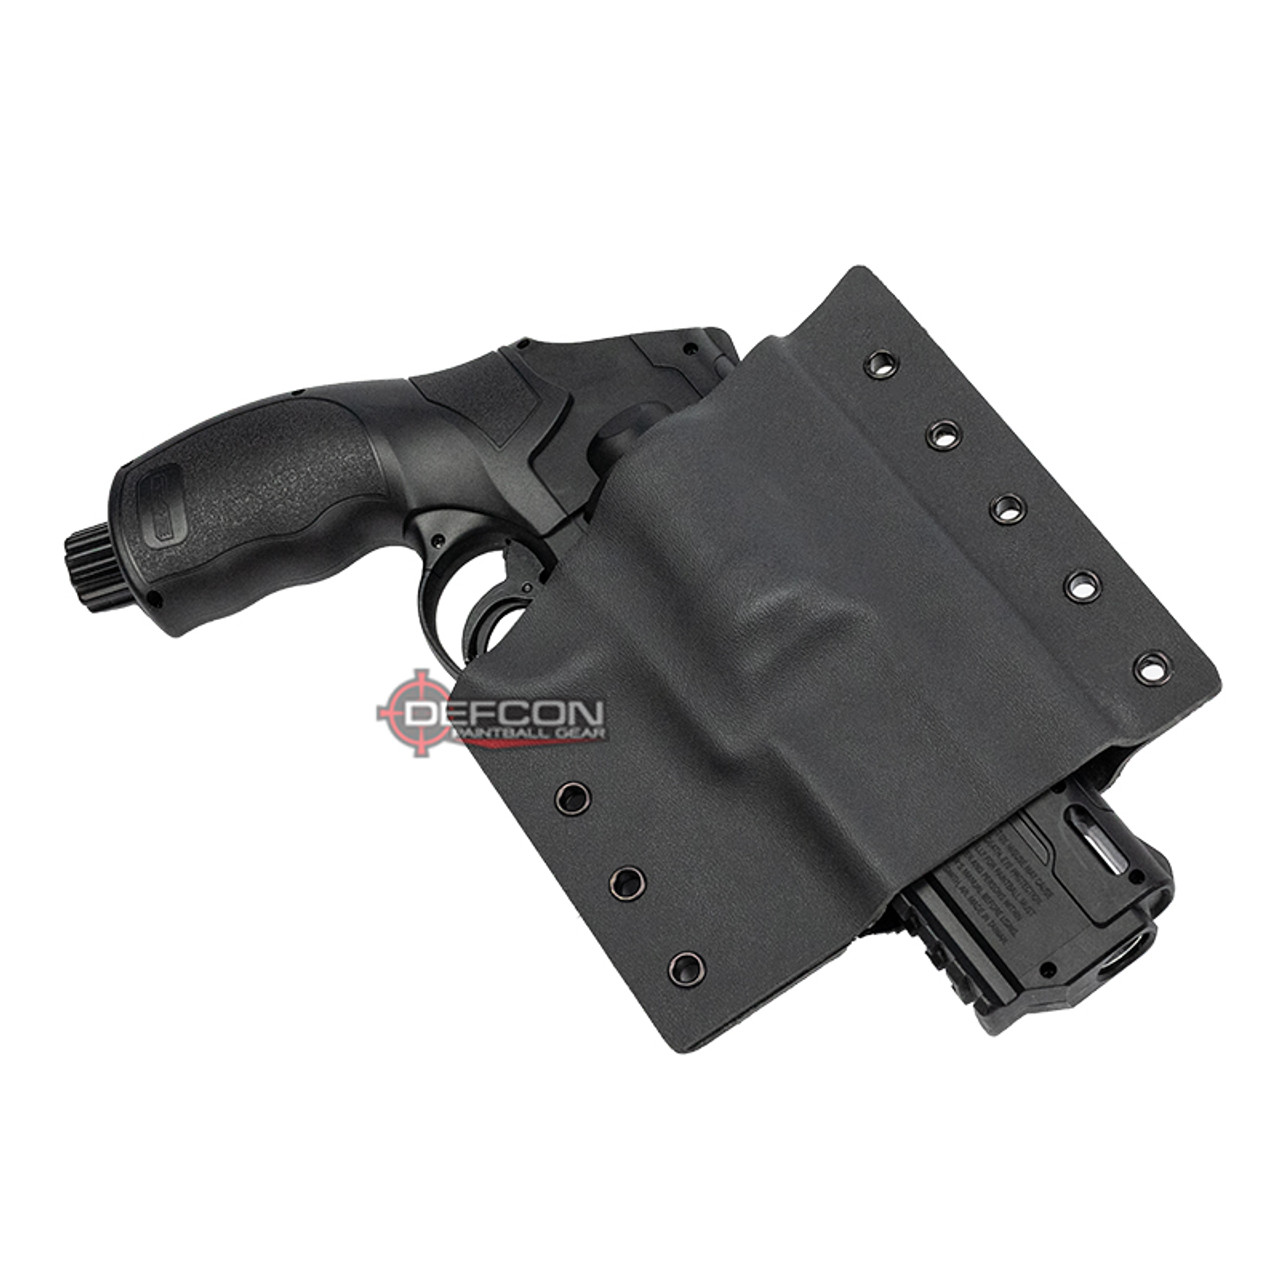 Kydex Holster For Umarex Hdr50 Revolver Black Defcon Paintball Gear